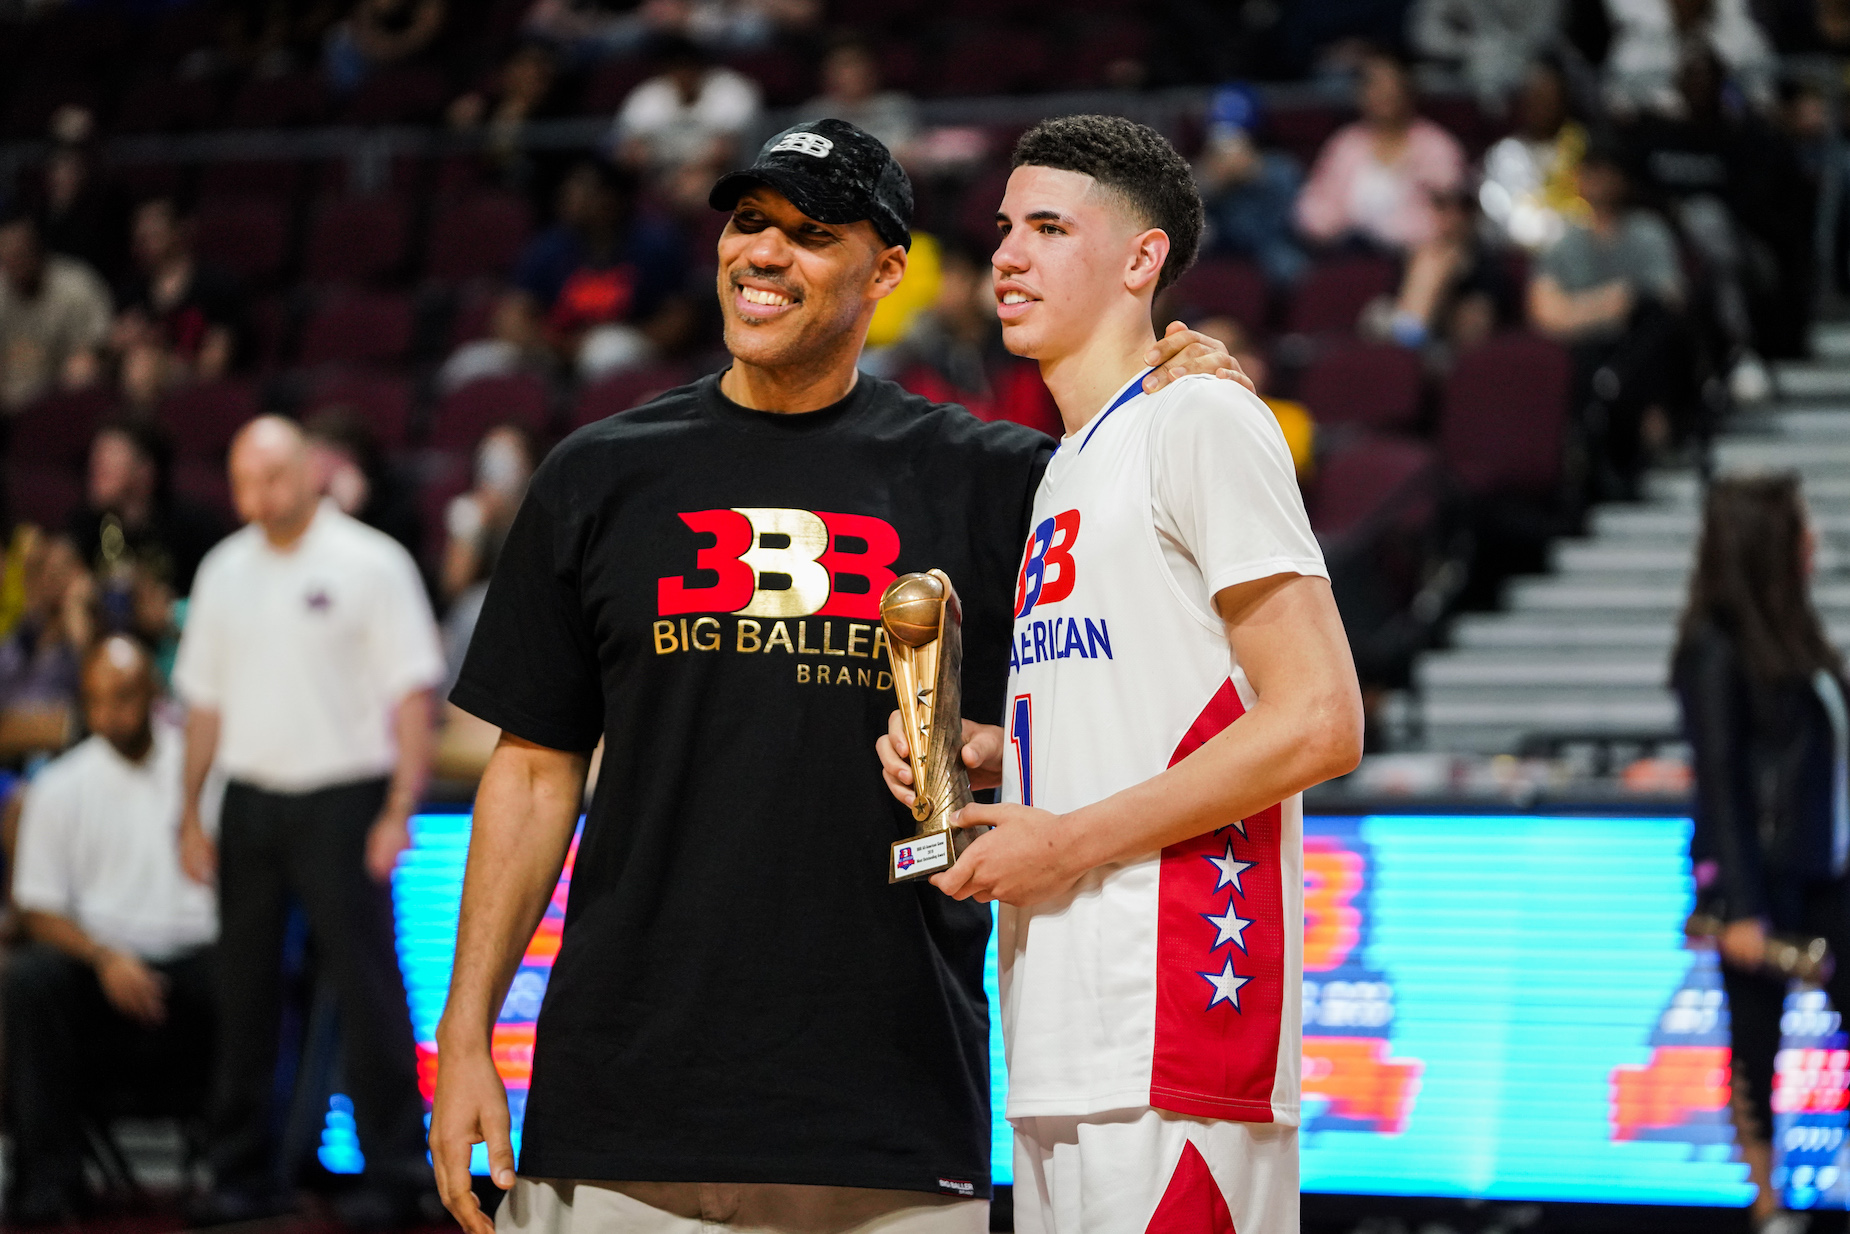 LaMelo Ball could make his father, Lavar Ball's, nightmare come true at the NBA draft.